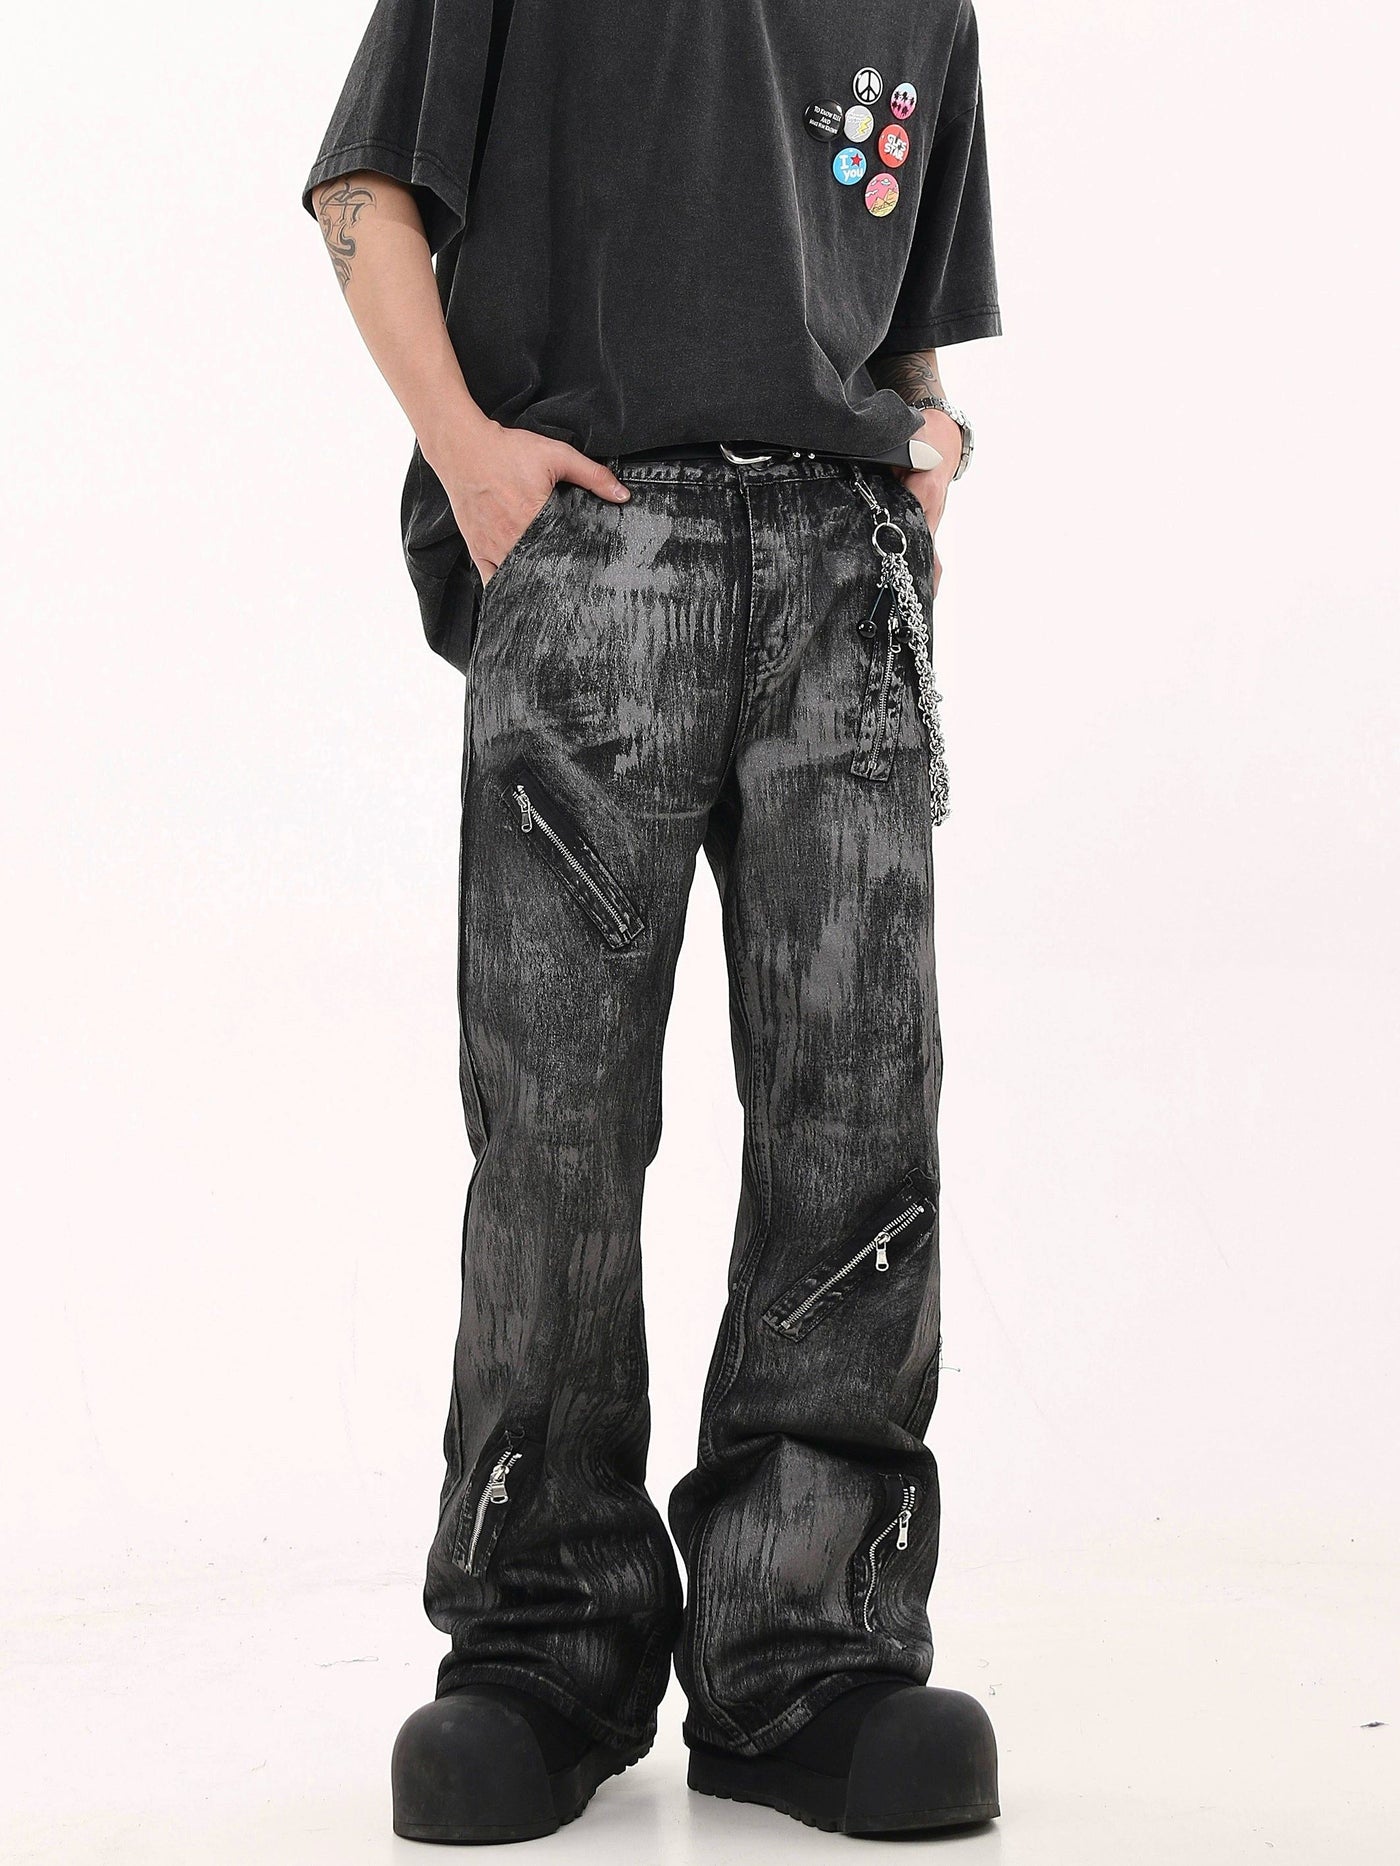 Brushed Wax Flared Jeans Korean Street Fashion Jeans By Blacklists Shop Online at OH Vault